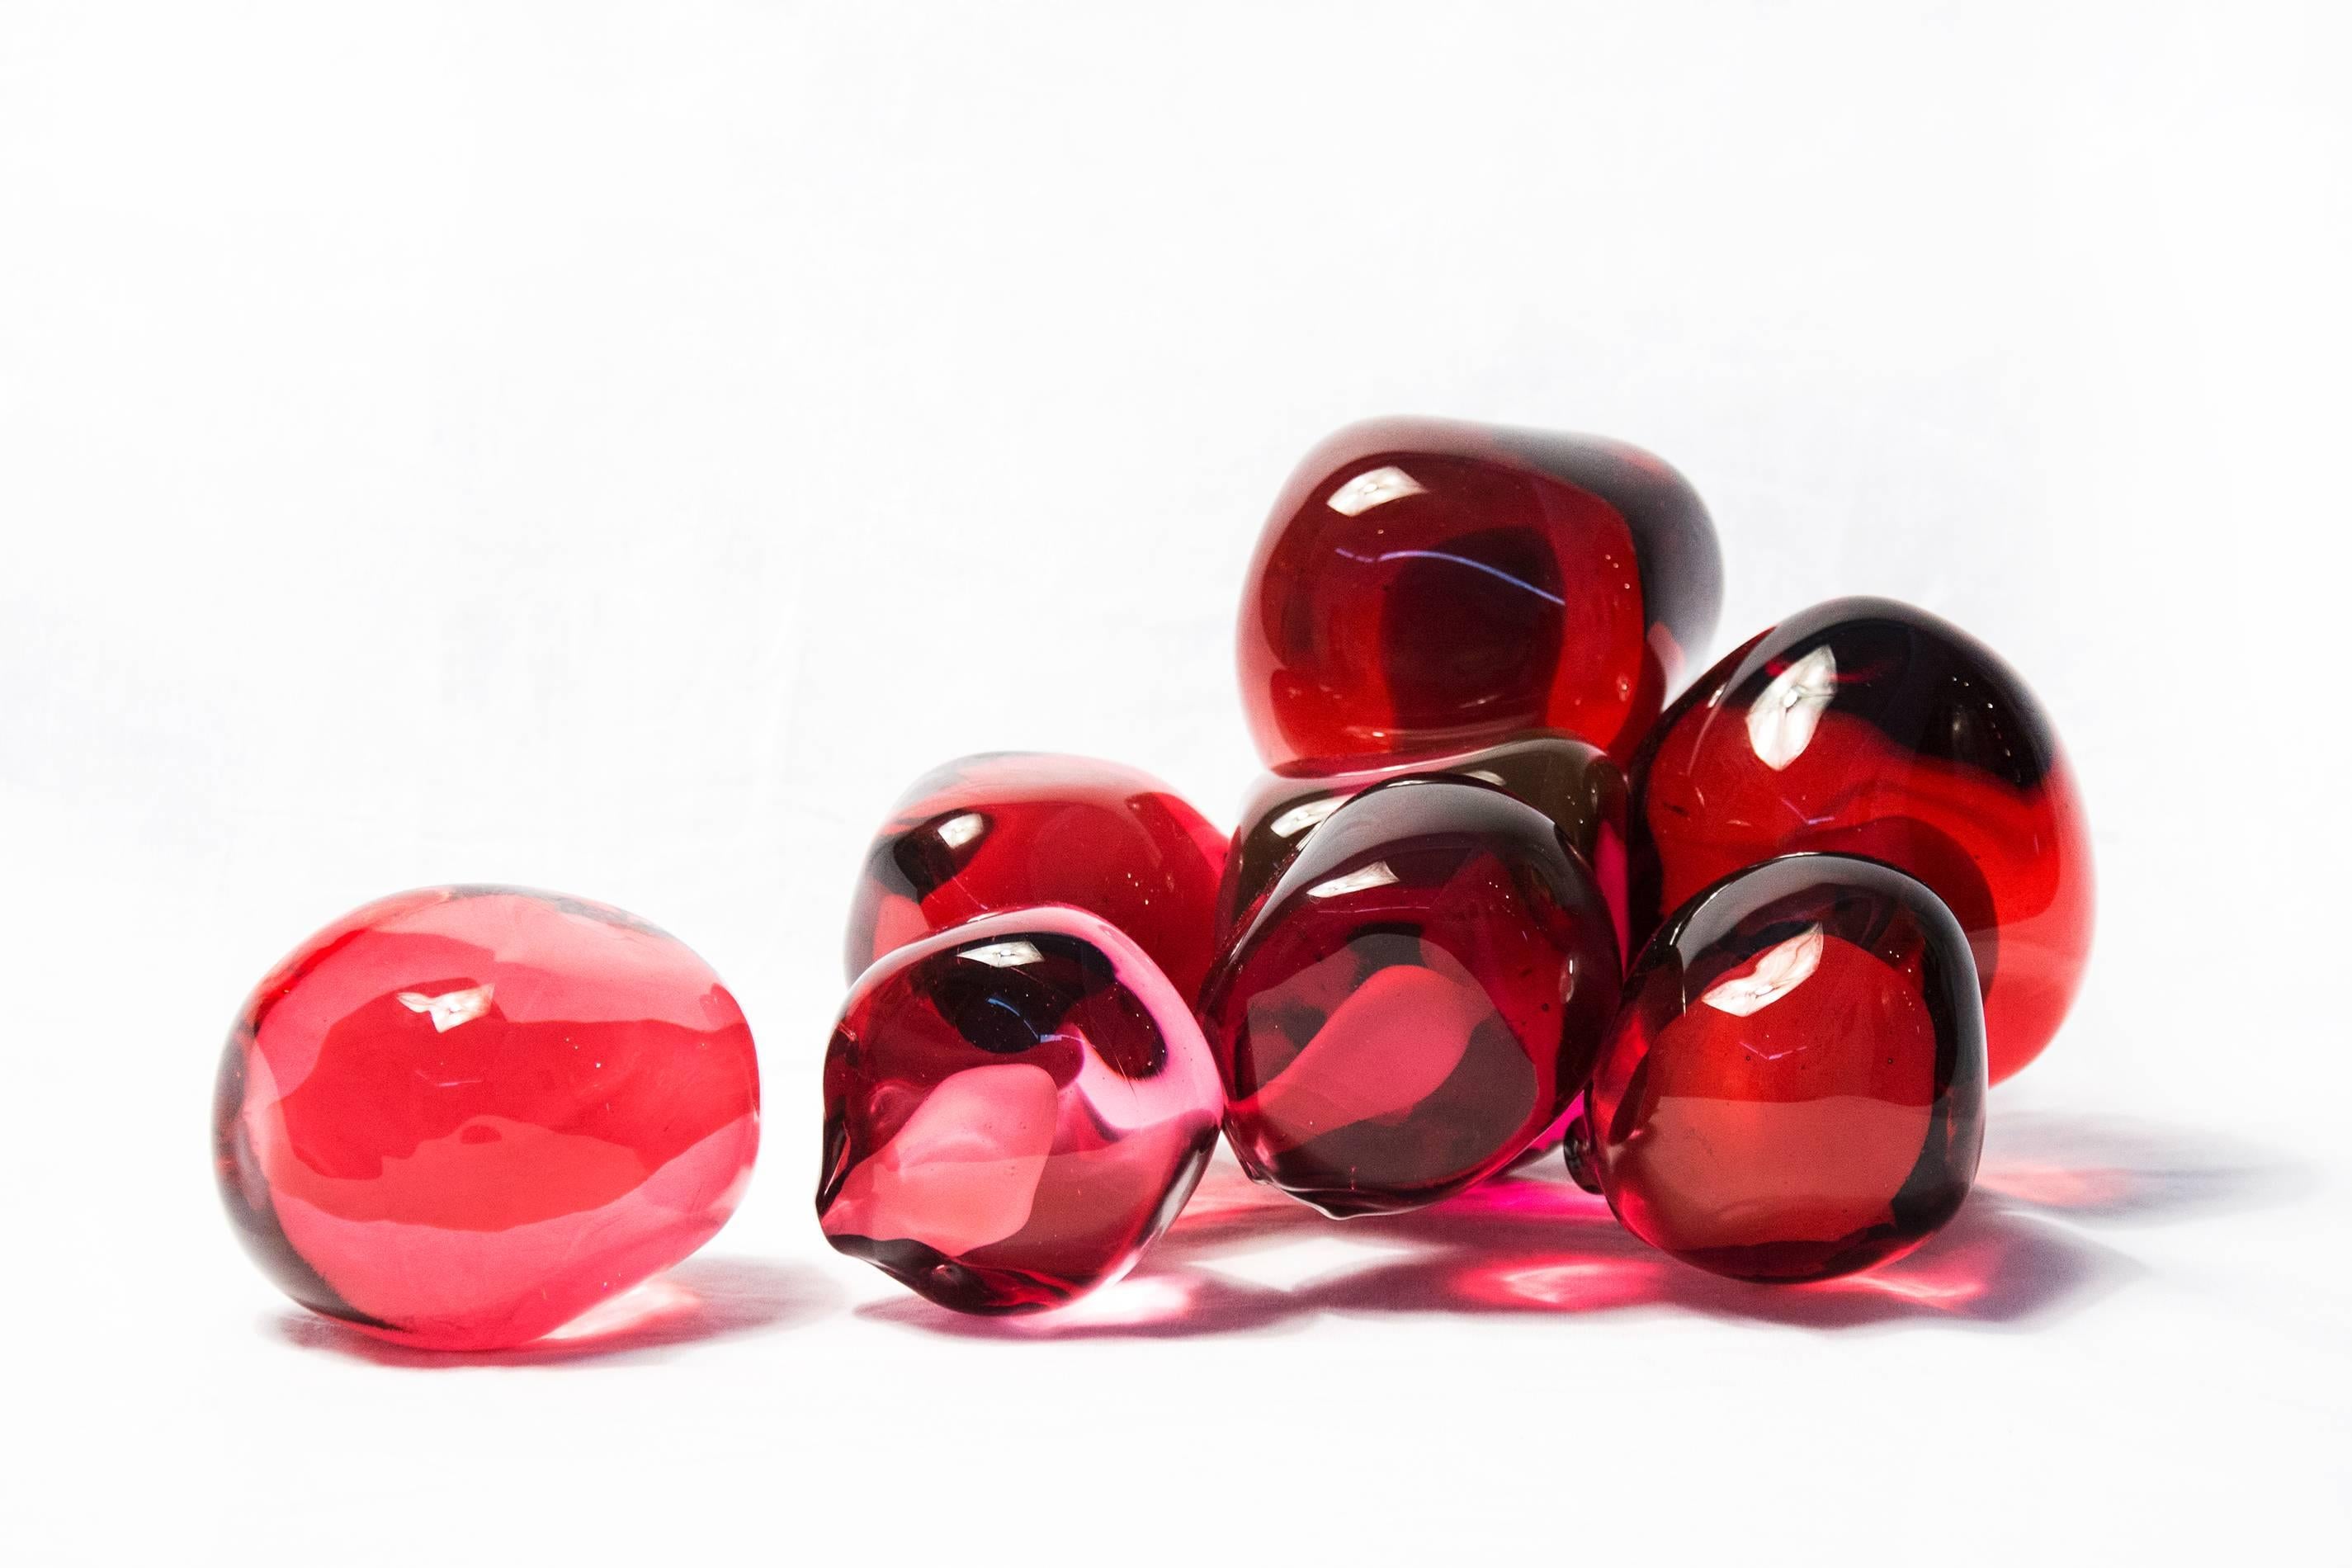 Catherine Vamvakas Lay Still-Life Sculpture - From the Earth: Red Seeds - luscious pomegranate red glass, still life sculpture